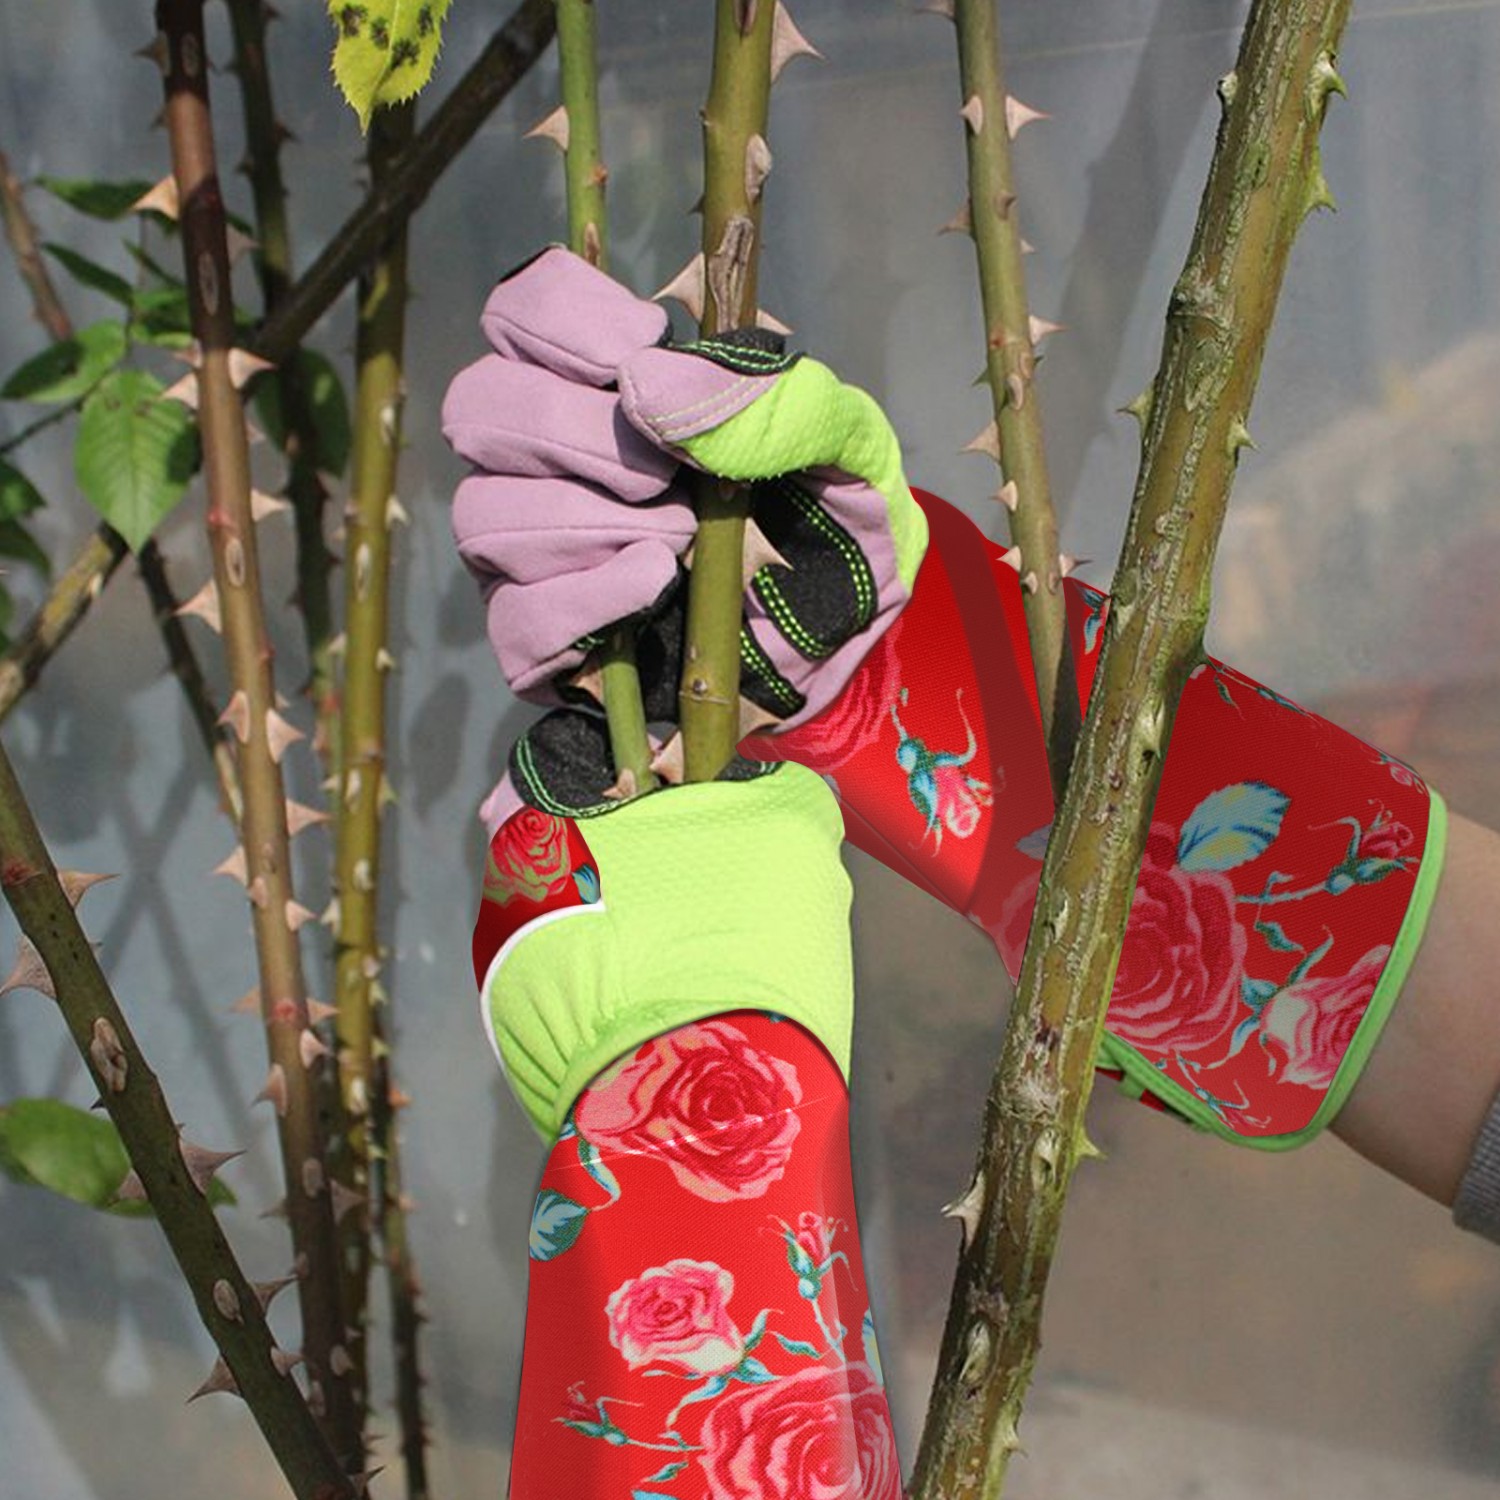 BE195T-L Professional Rose Pruning Thornproof Gardening Gloves with Extra Long Forearm Protection for Women 1 Pair Large - Puncture Resistant 